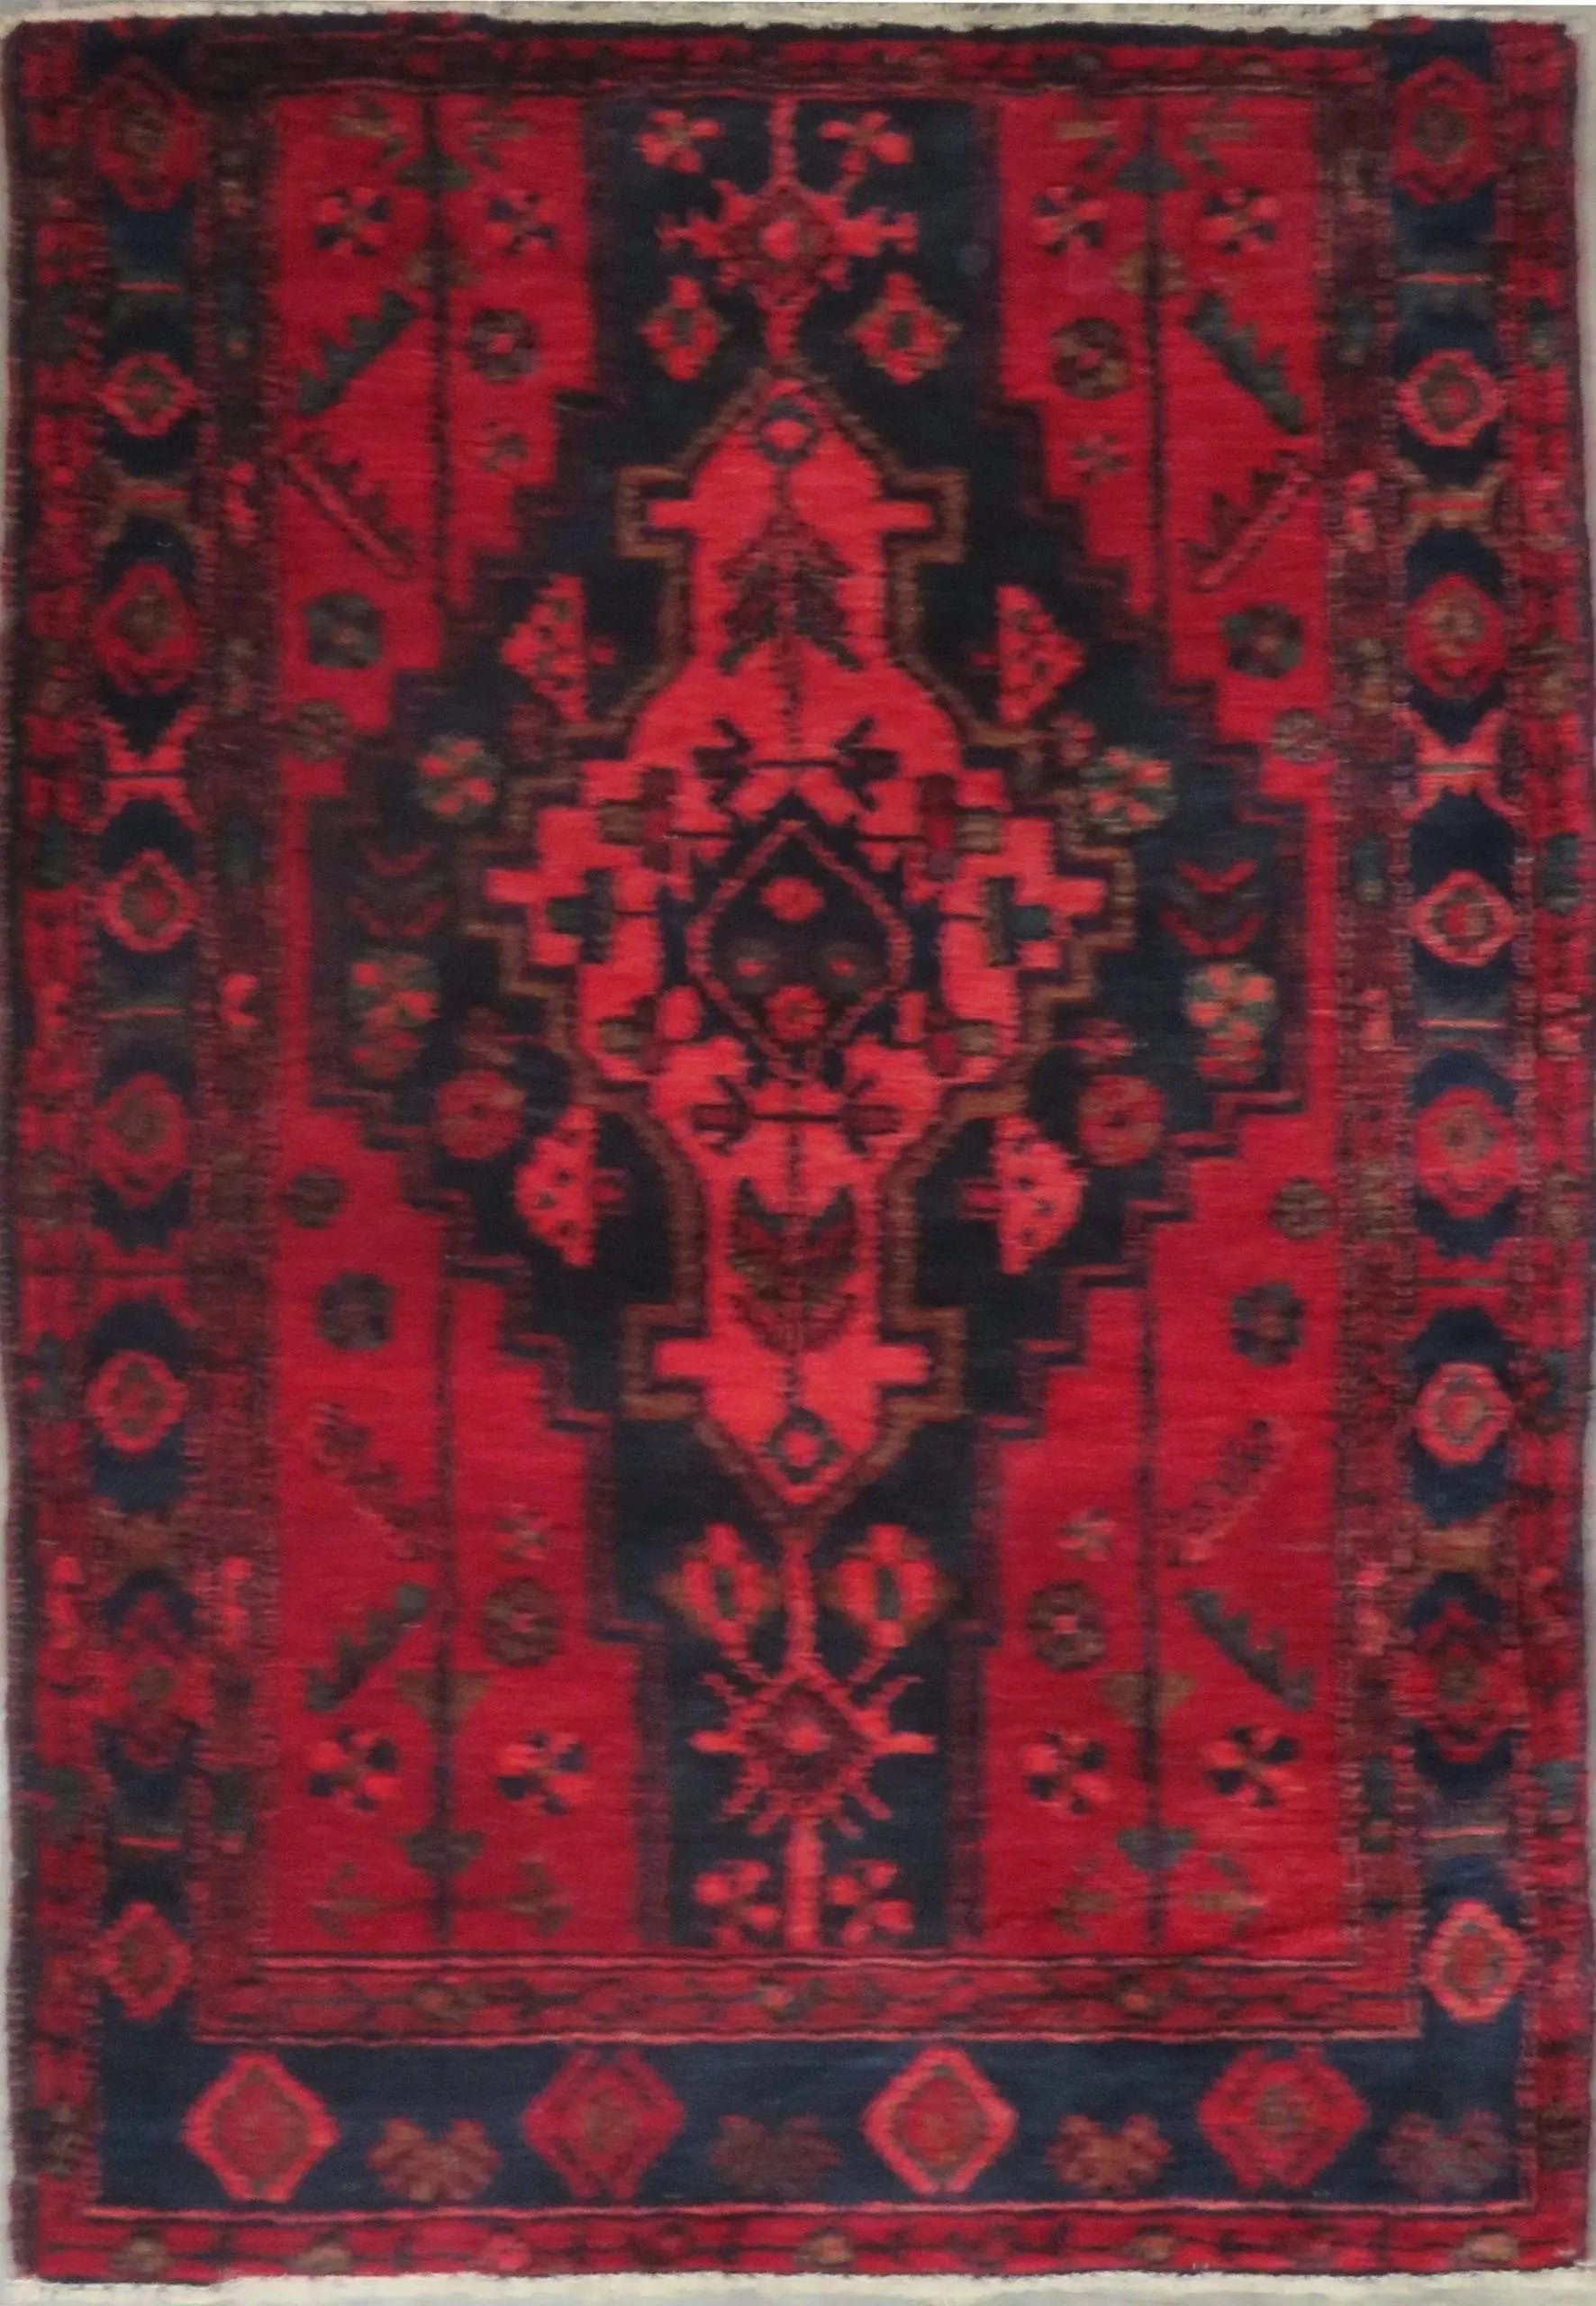 Hand-Knotted Persian Wool Rug _ Luxurious Vintage Design, 4'9" x 3'3", Artisan Crafted